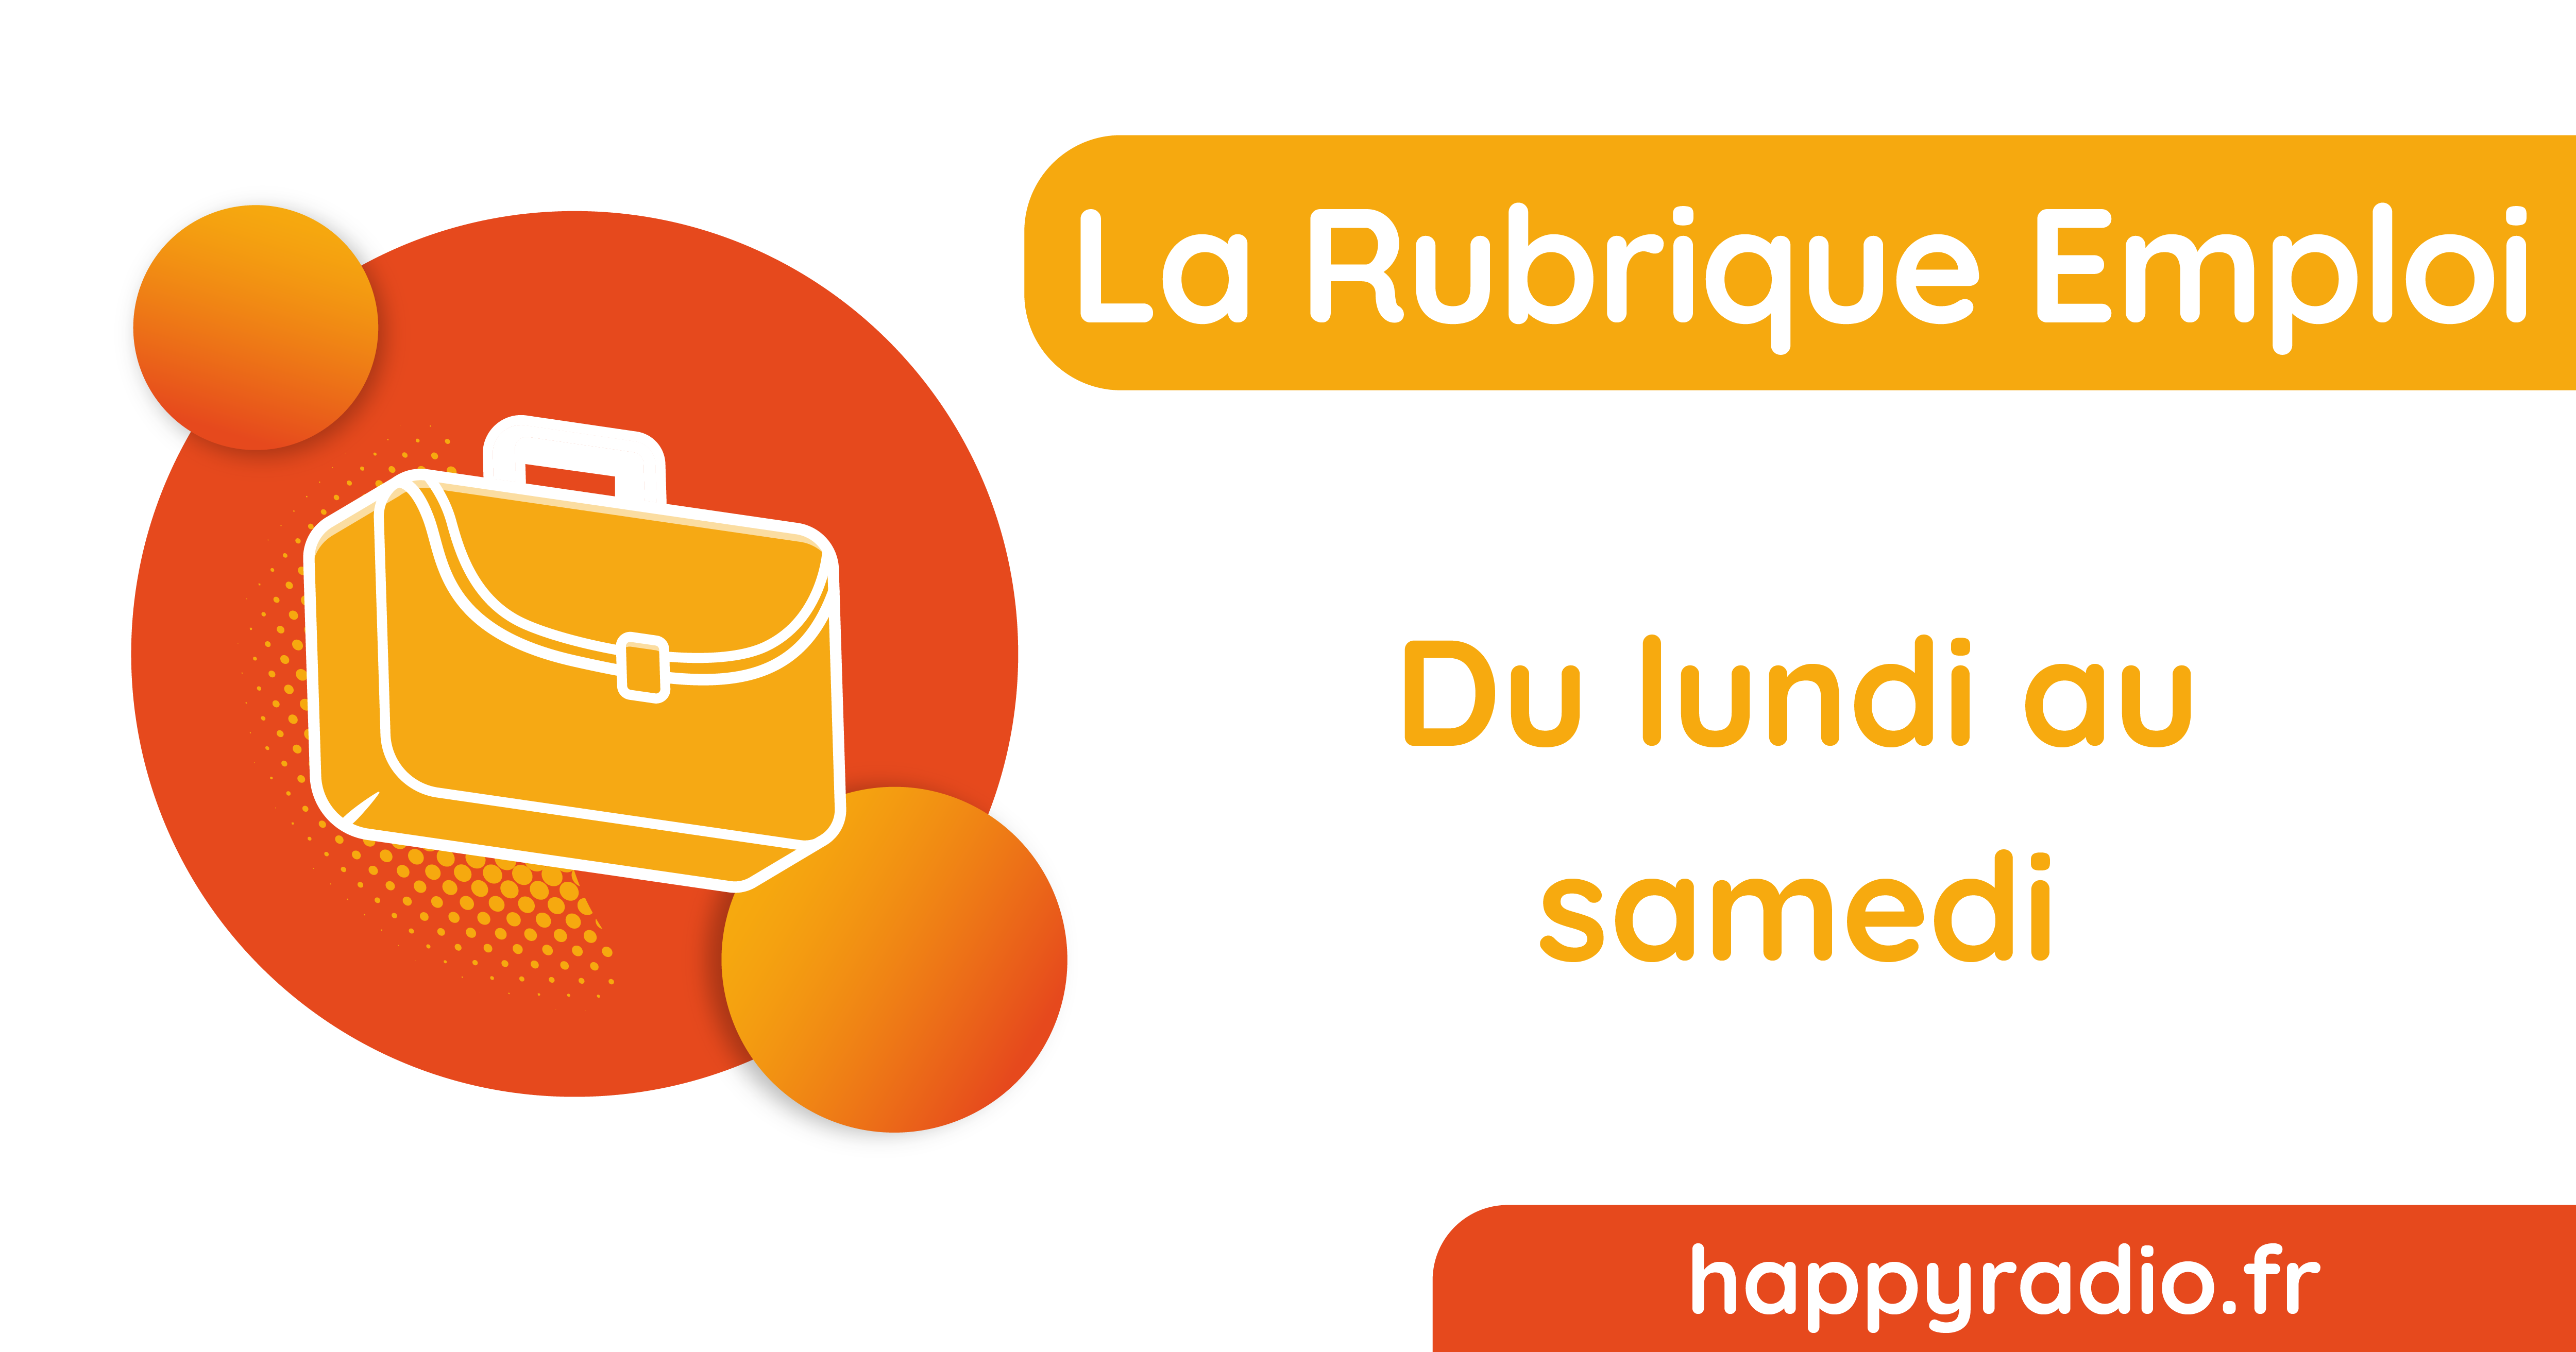 You are currently viewing La Rubrique Emploi